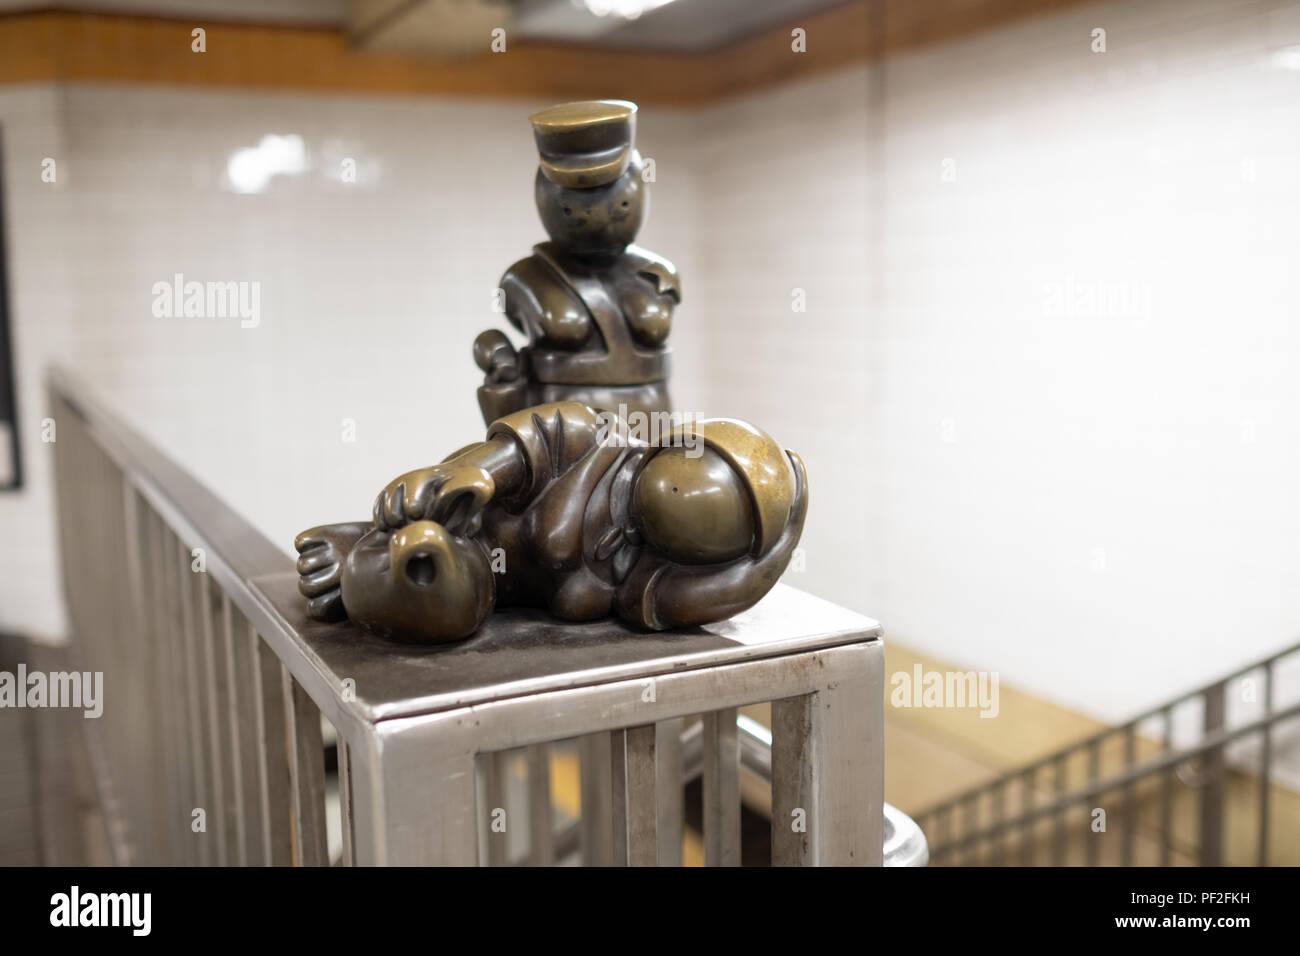 Sculpture Sleeping Homeless with Officer in Background at New Yorker Subway Stock Photo